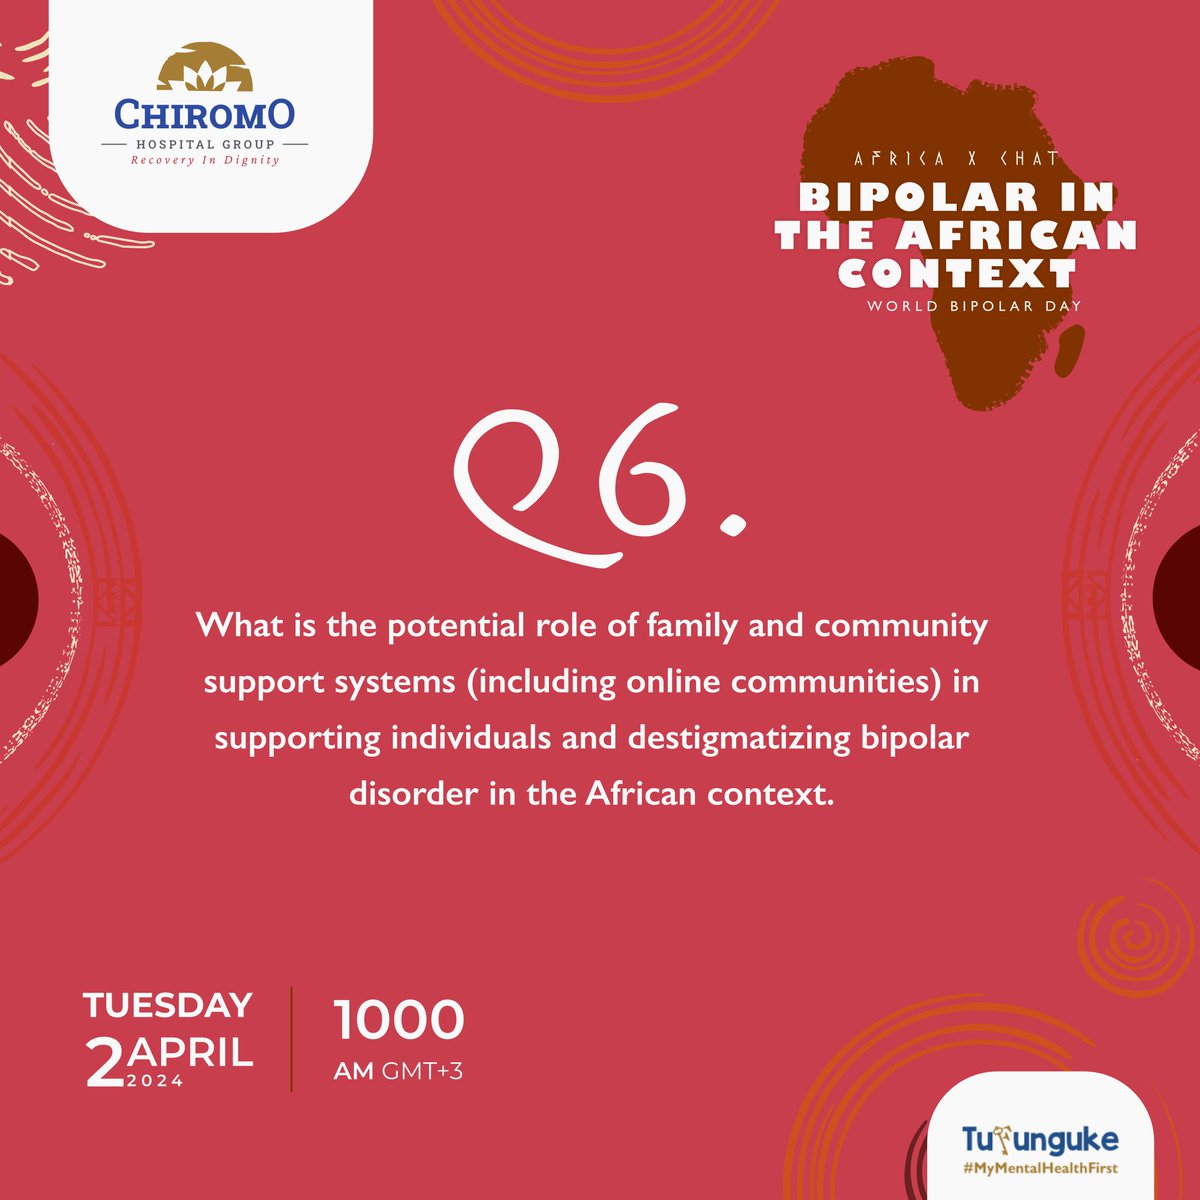 Q6. What is the potential role of family and community support systems (including online communities) in supporting individuals and destigmatizing bipolar disorder in the African context? #Tufunguke about #bipolar